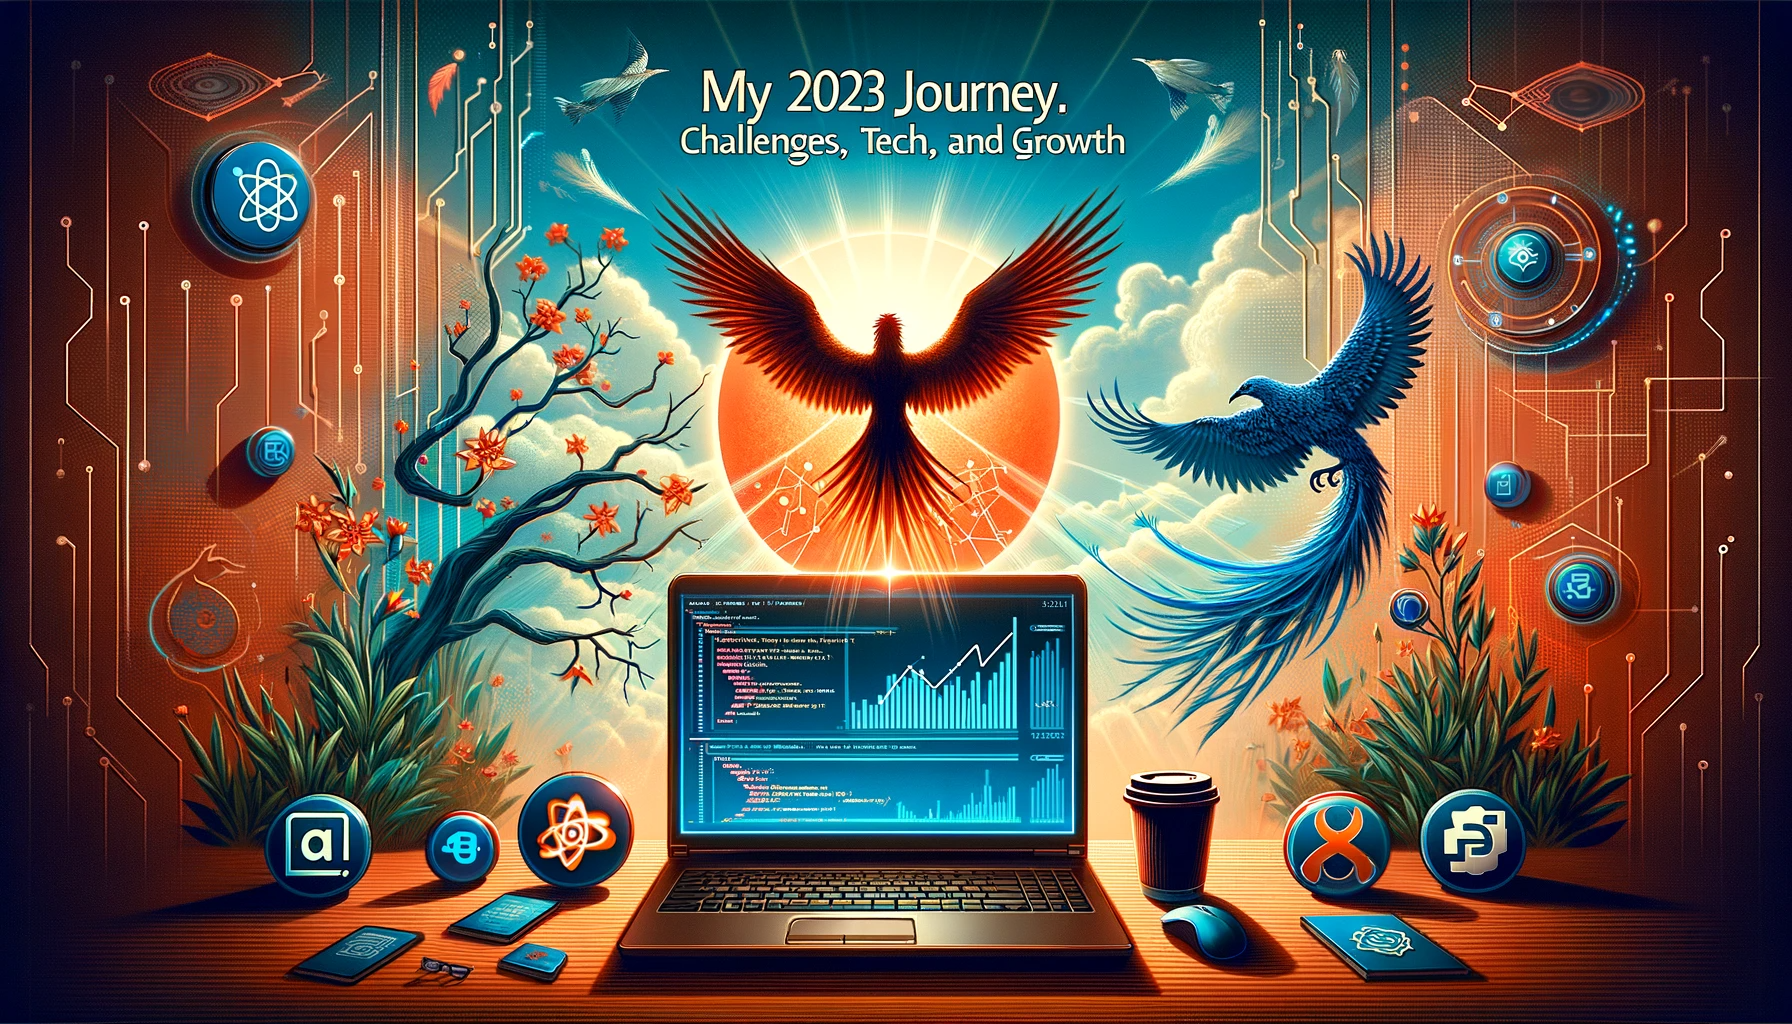 My 2023 Journey. Challenges, Tech and Growth